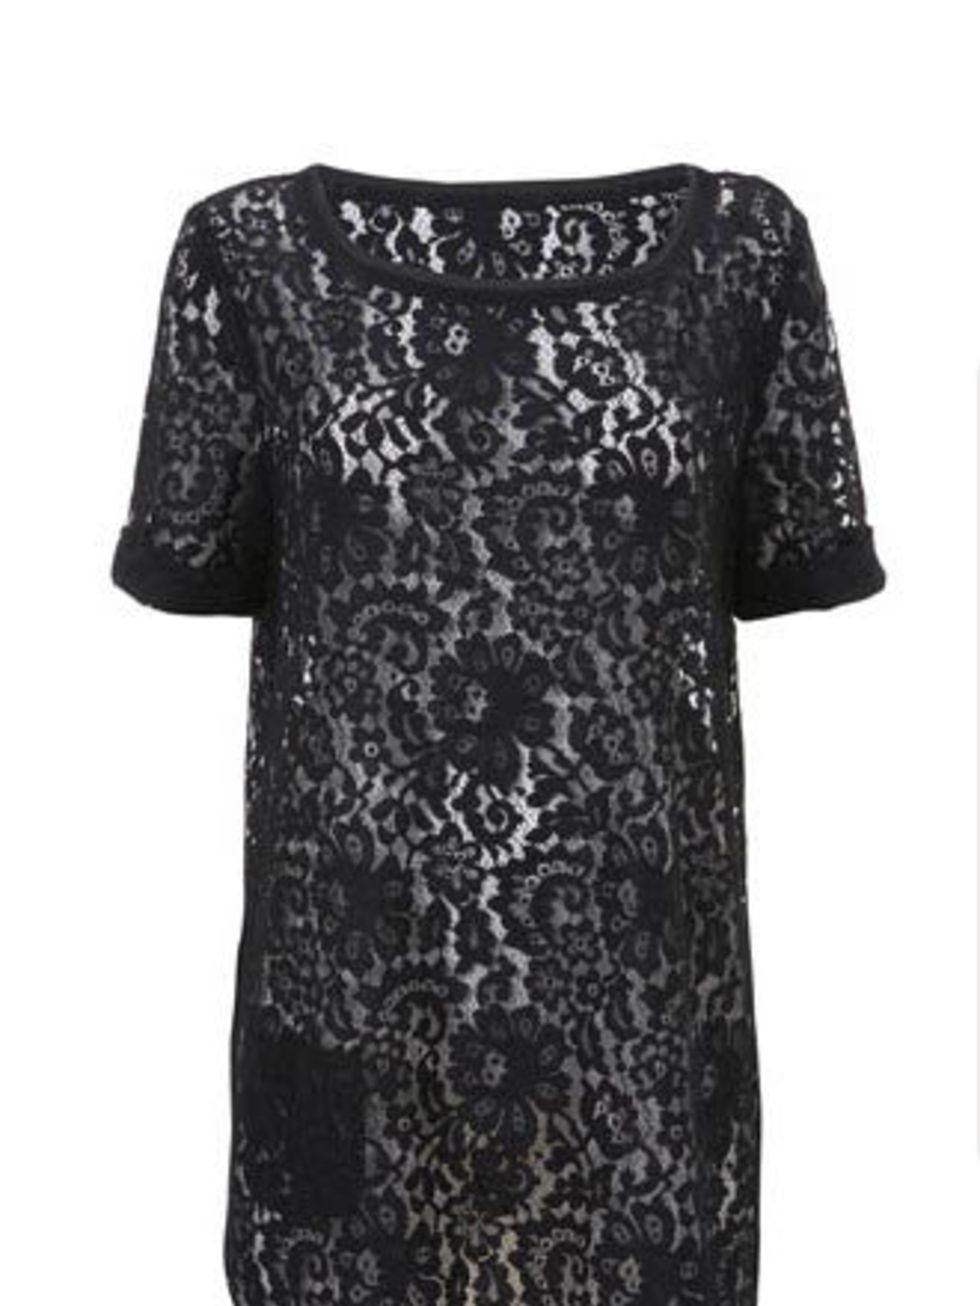 <p>Lace Top, £40 by <a href="http://www.warehouse.co.uk/fcp/product/fashion/Smart-Tops/lace-t-shirt/298900">Warehouse</a></p>